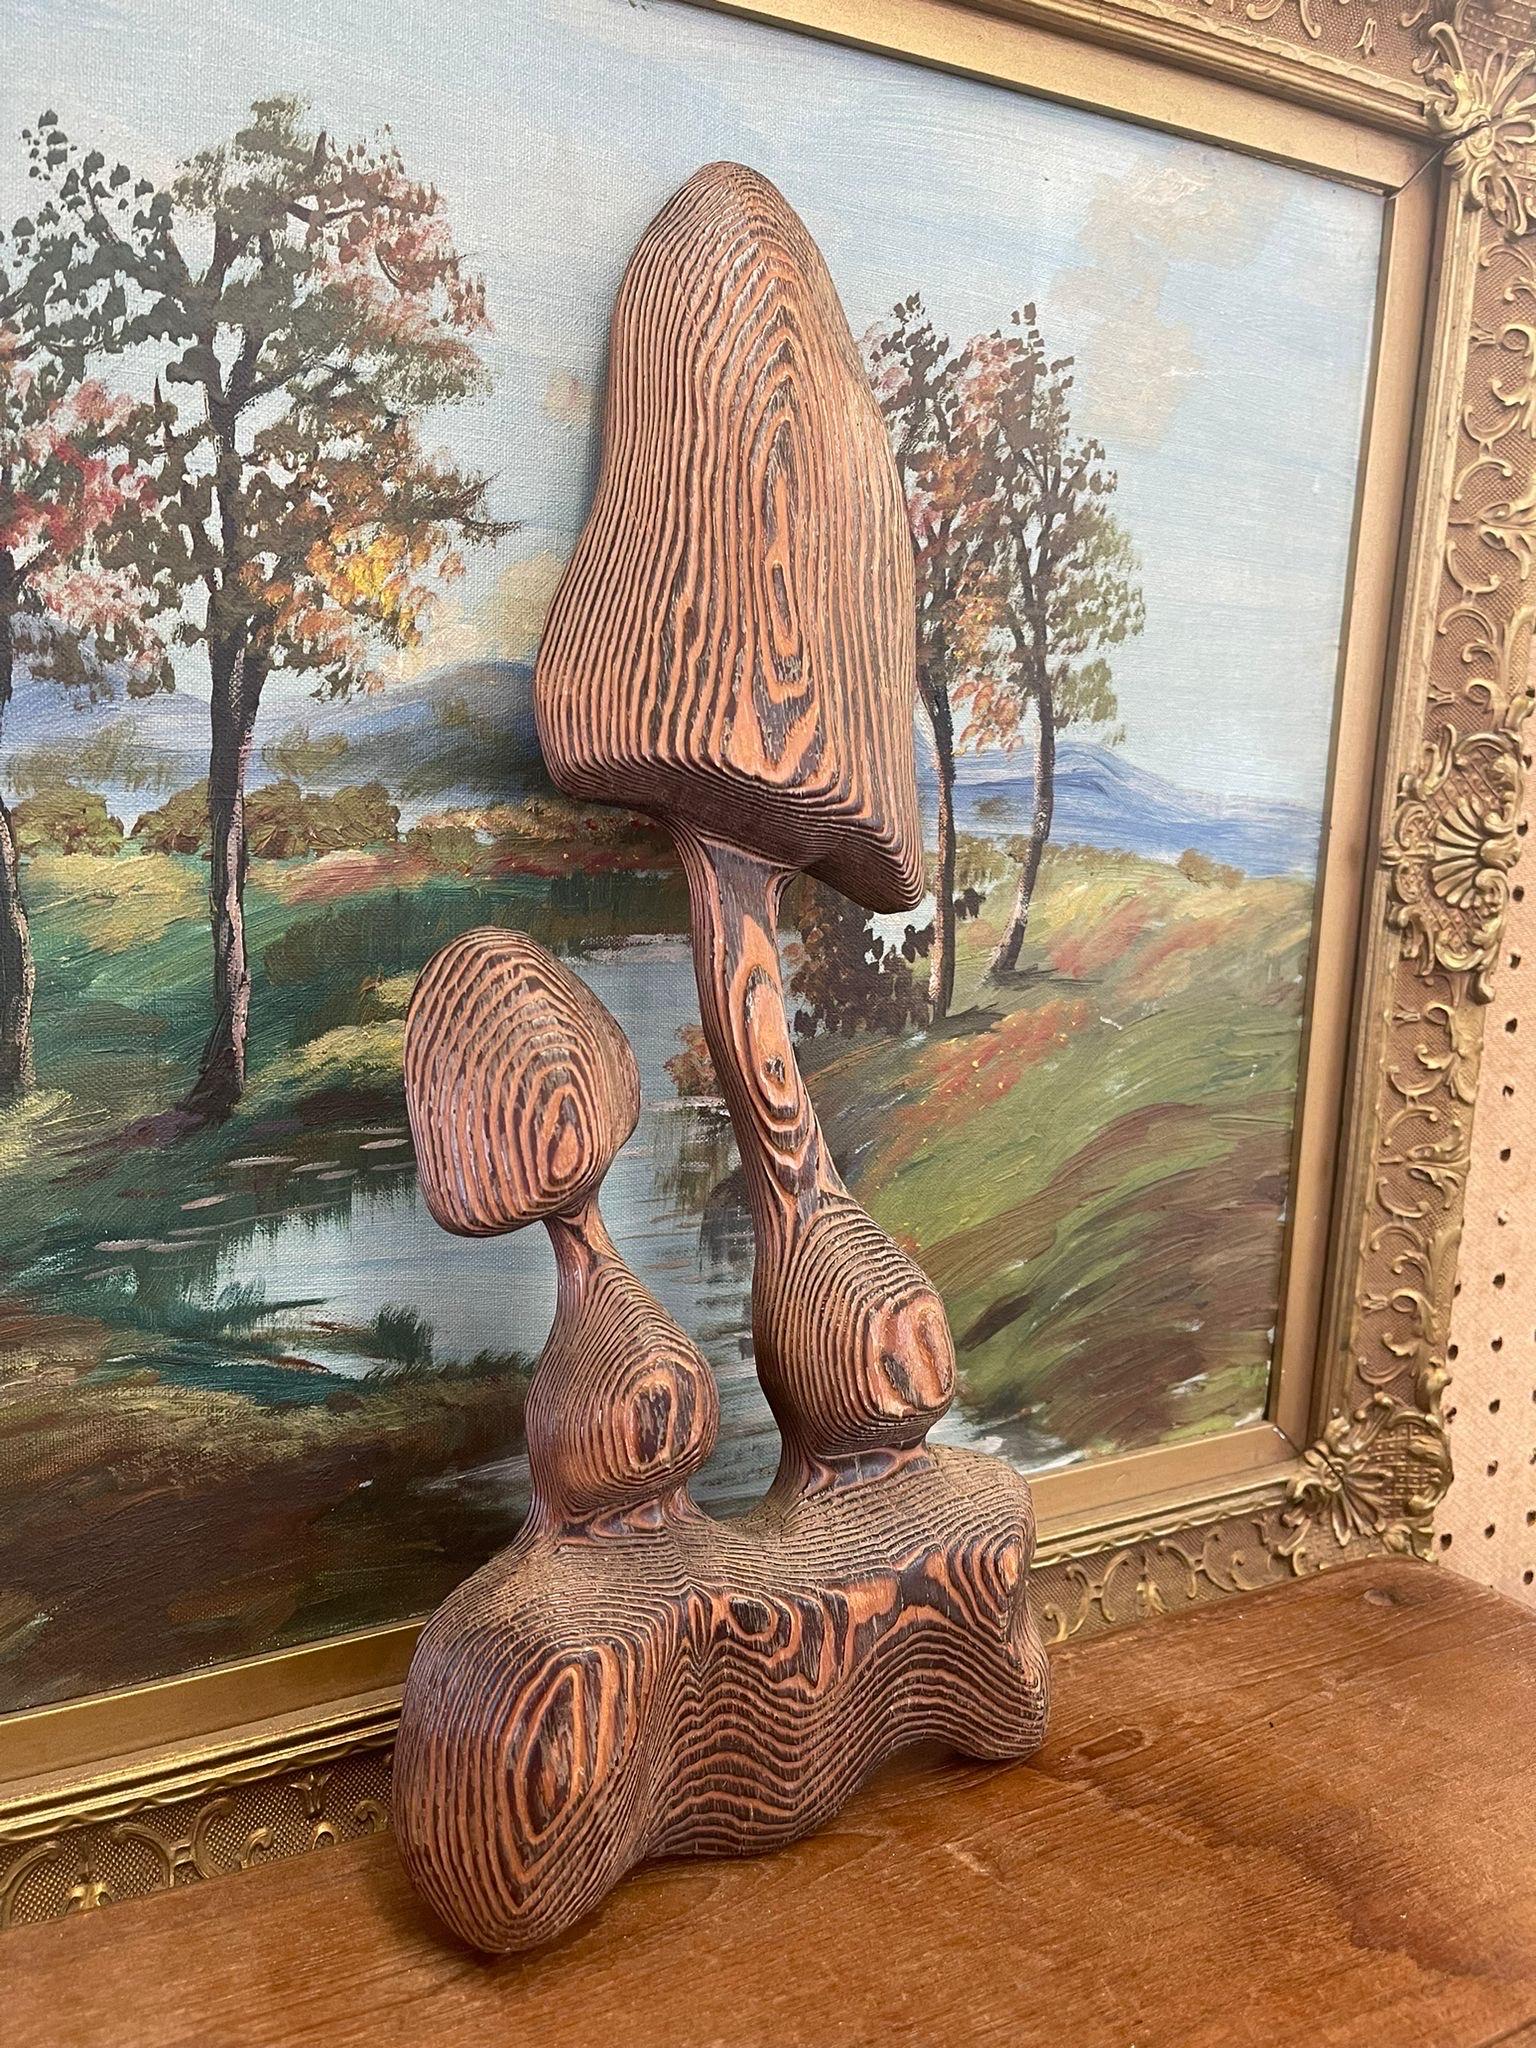 This Hand carved mushroom wall Art has stunning wood grain. Hook attached to the back ready to be hung up. Vintage condition consistent with age as Pictured.

Dimensions. 7 W ; 2 D ; 16 H